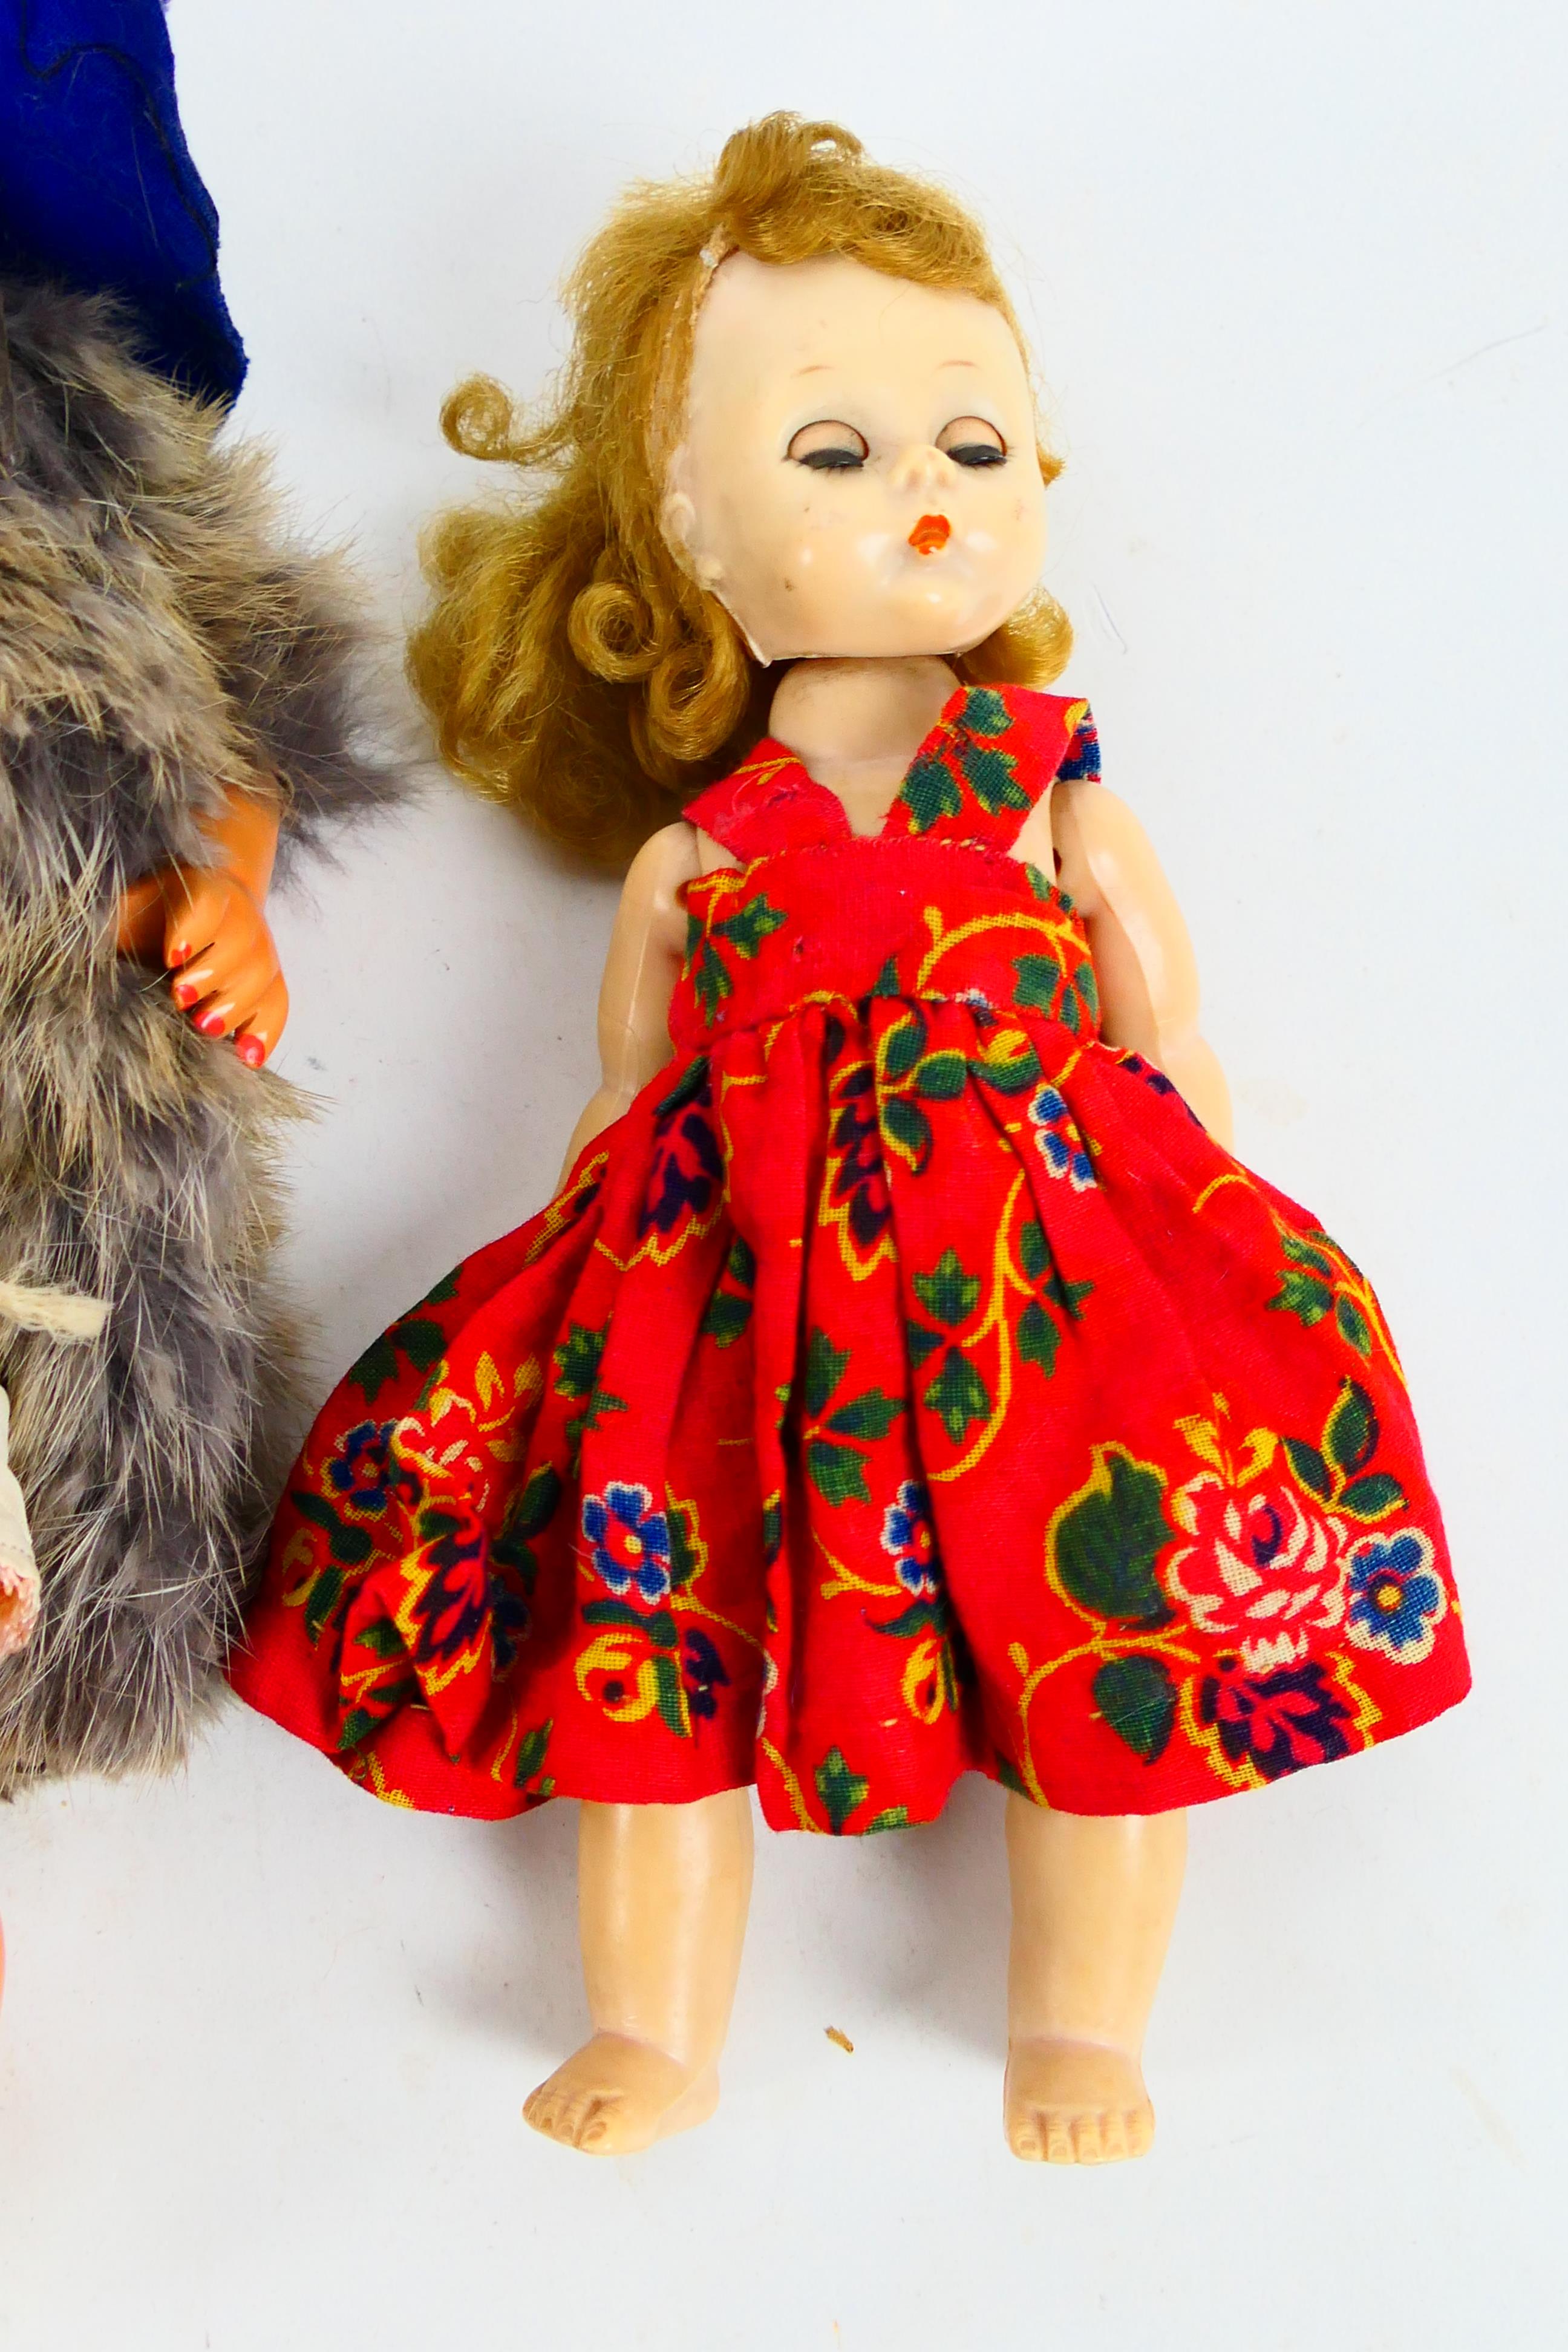 Composite Dolls - Alex - Tudor Rose. A selection of Three loose dolls. - Image 3 of 7